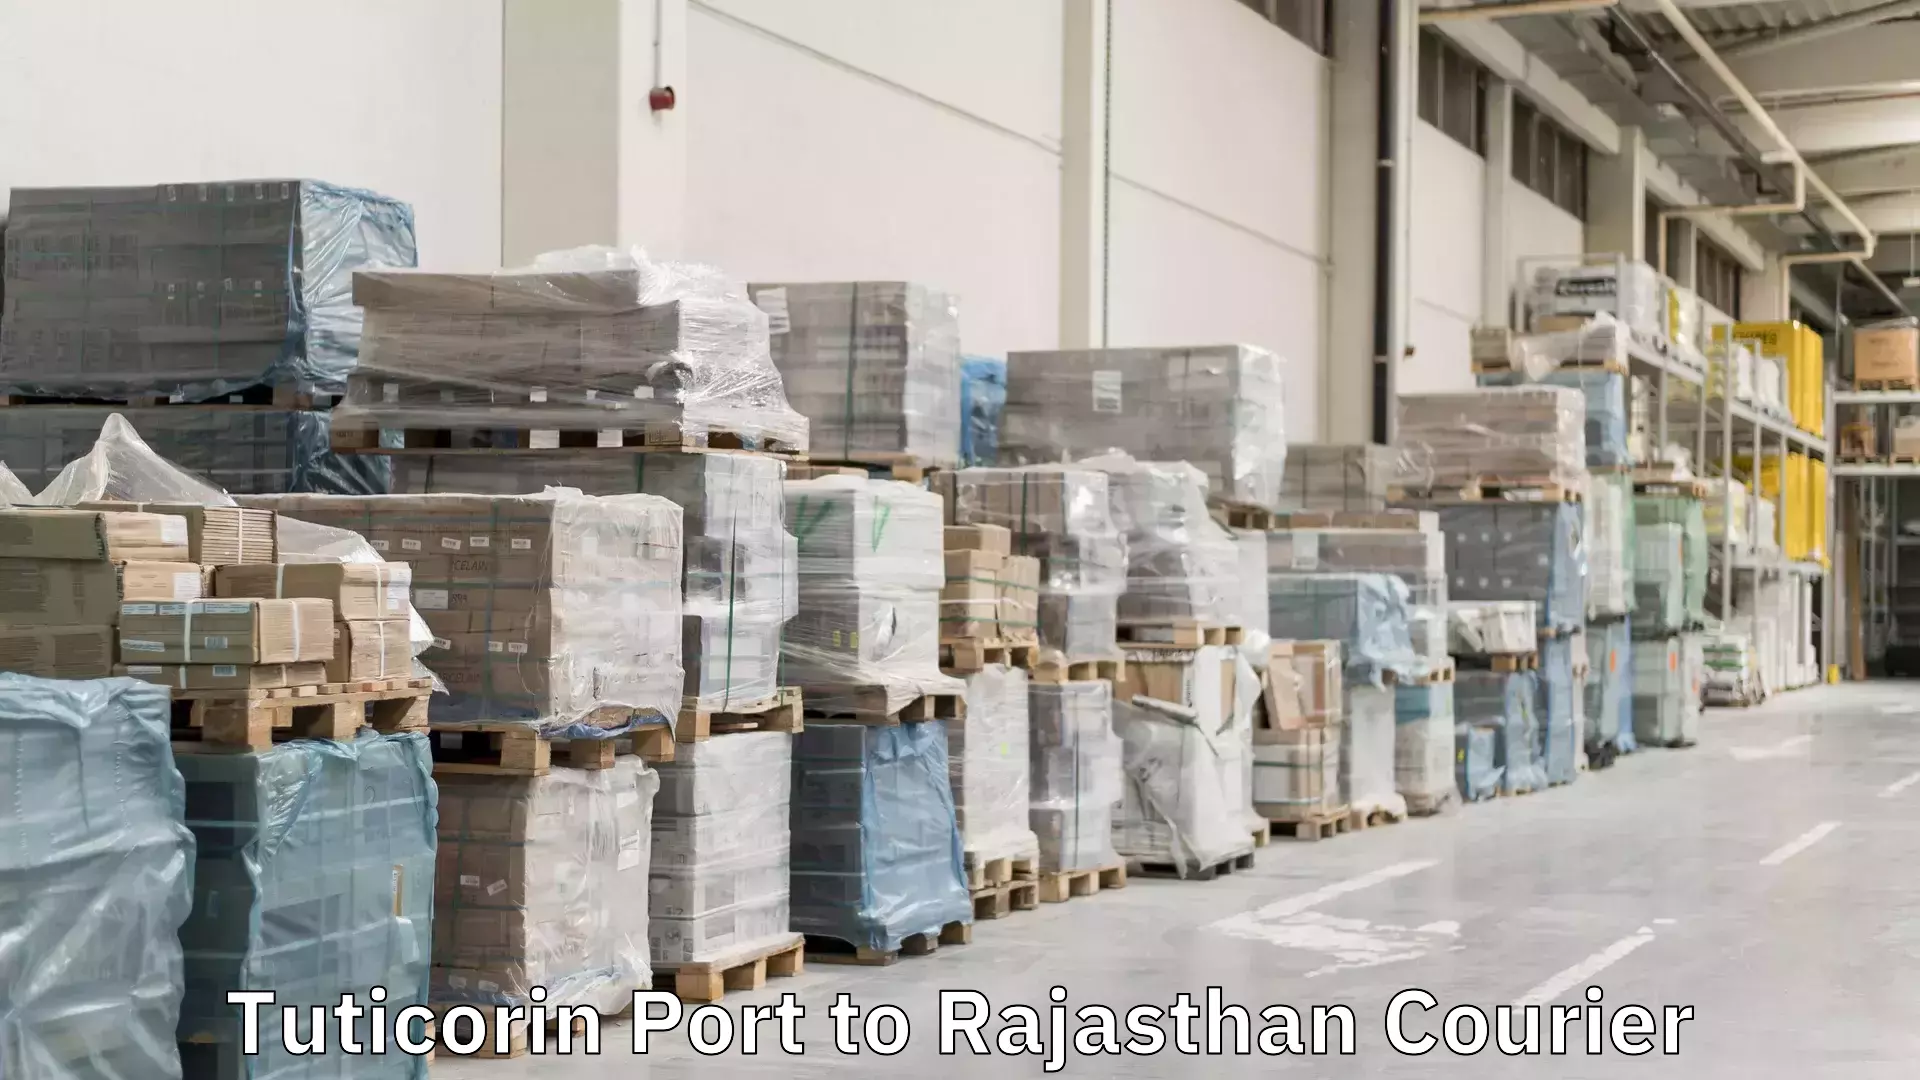 Express delivery capabilities Tuticorin Port to Rajasthan